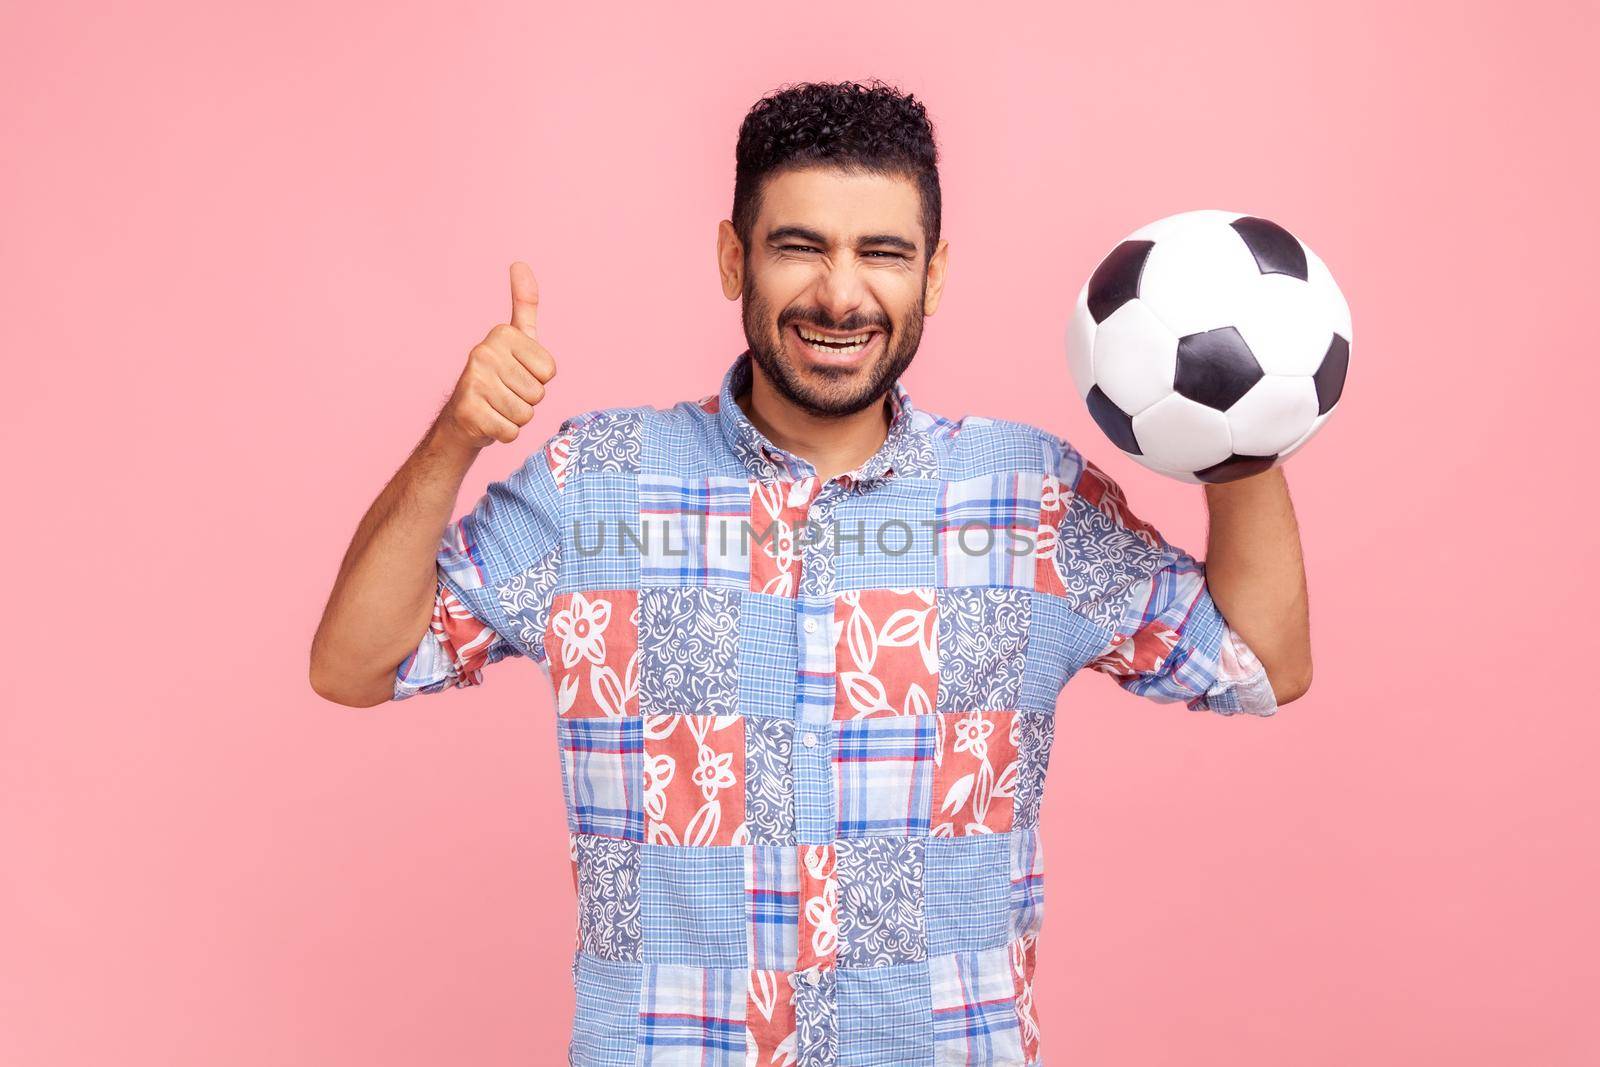 Happy excited bearded man with dark hair and beard wearing blue shirt posing with soccer ball and showing thumb up, cheering on football match. by Khosro1